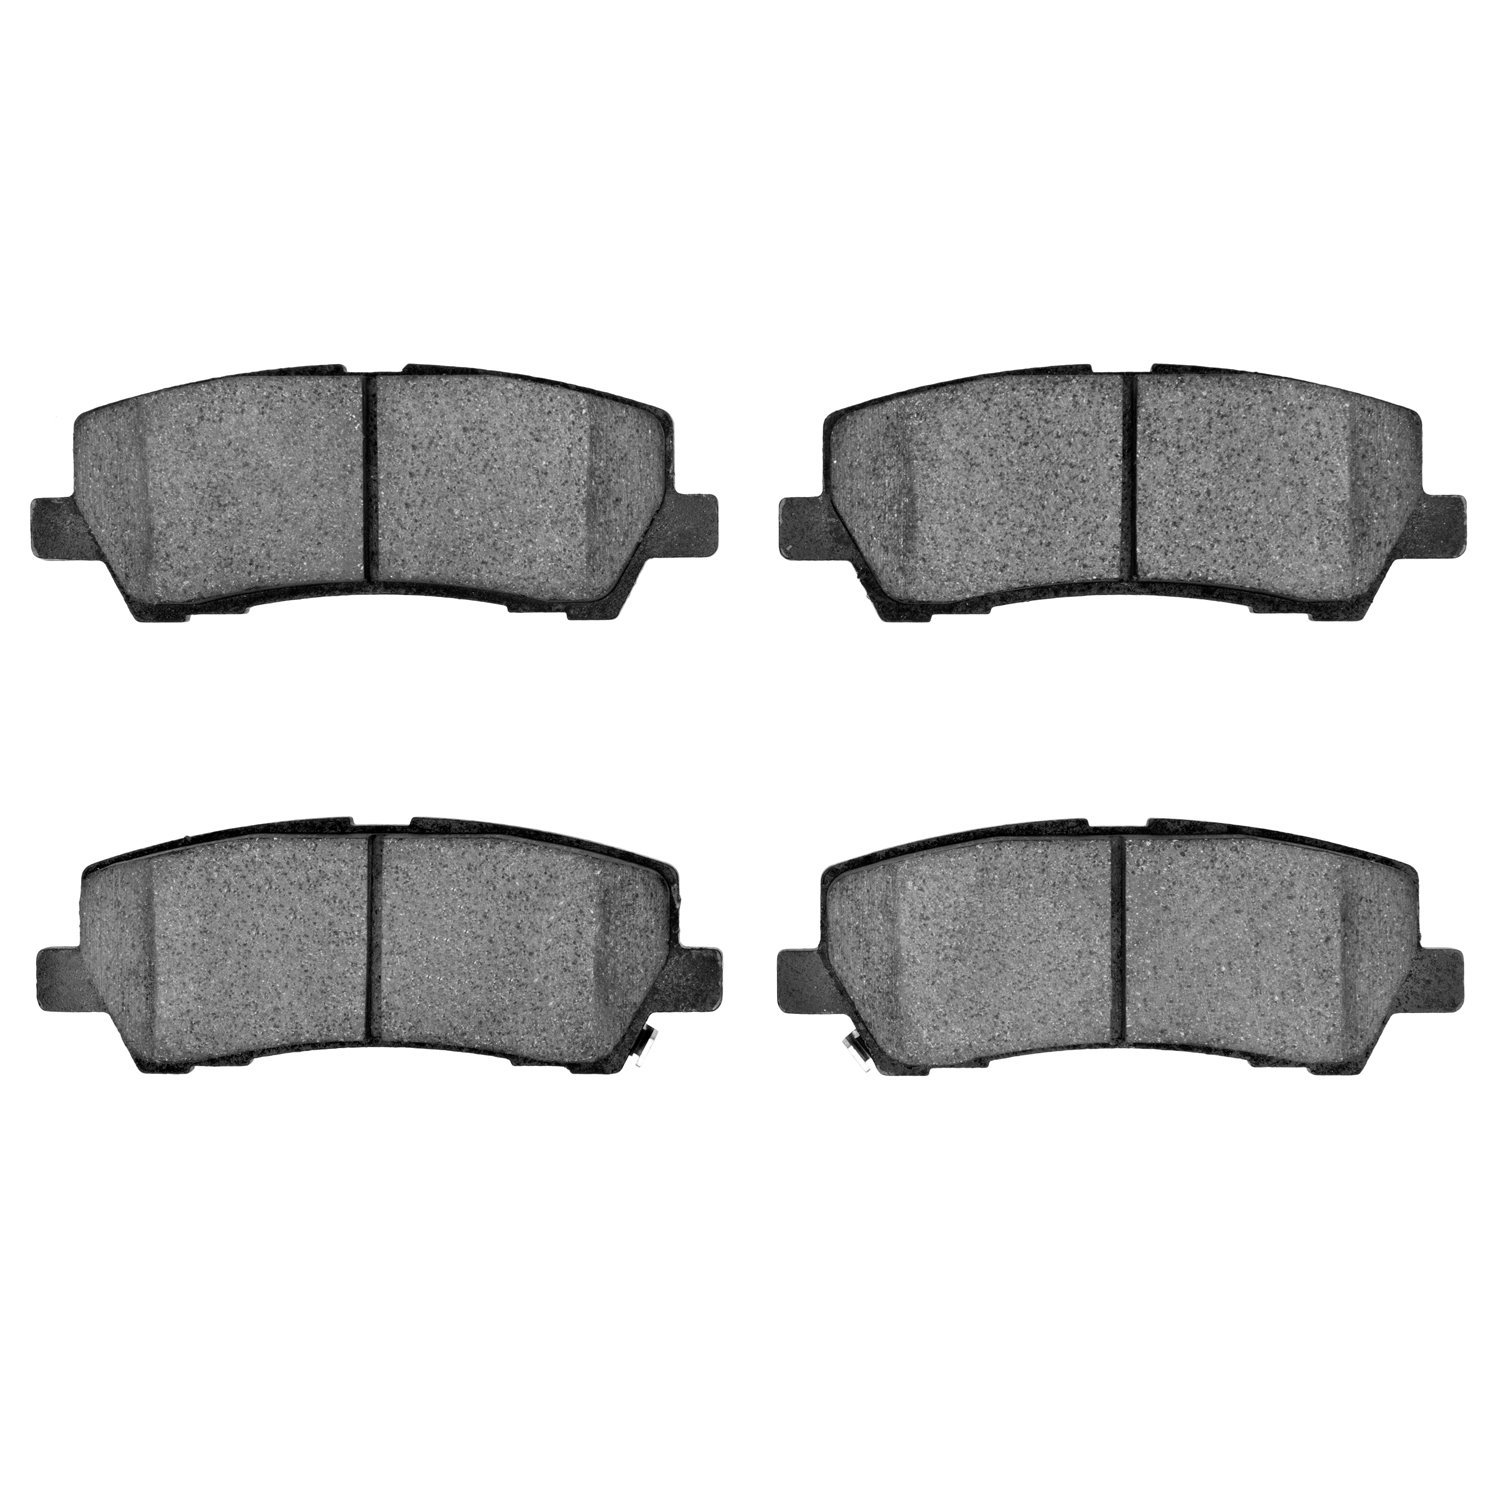 1310-1793-00 3000-Series Ceramic Brake Pads, Fits Select Ford/Lincoln/Mercury/Mazda, Position: Rear